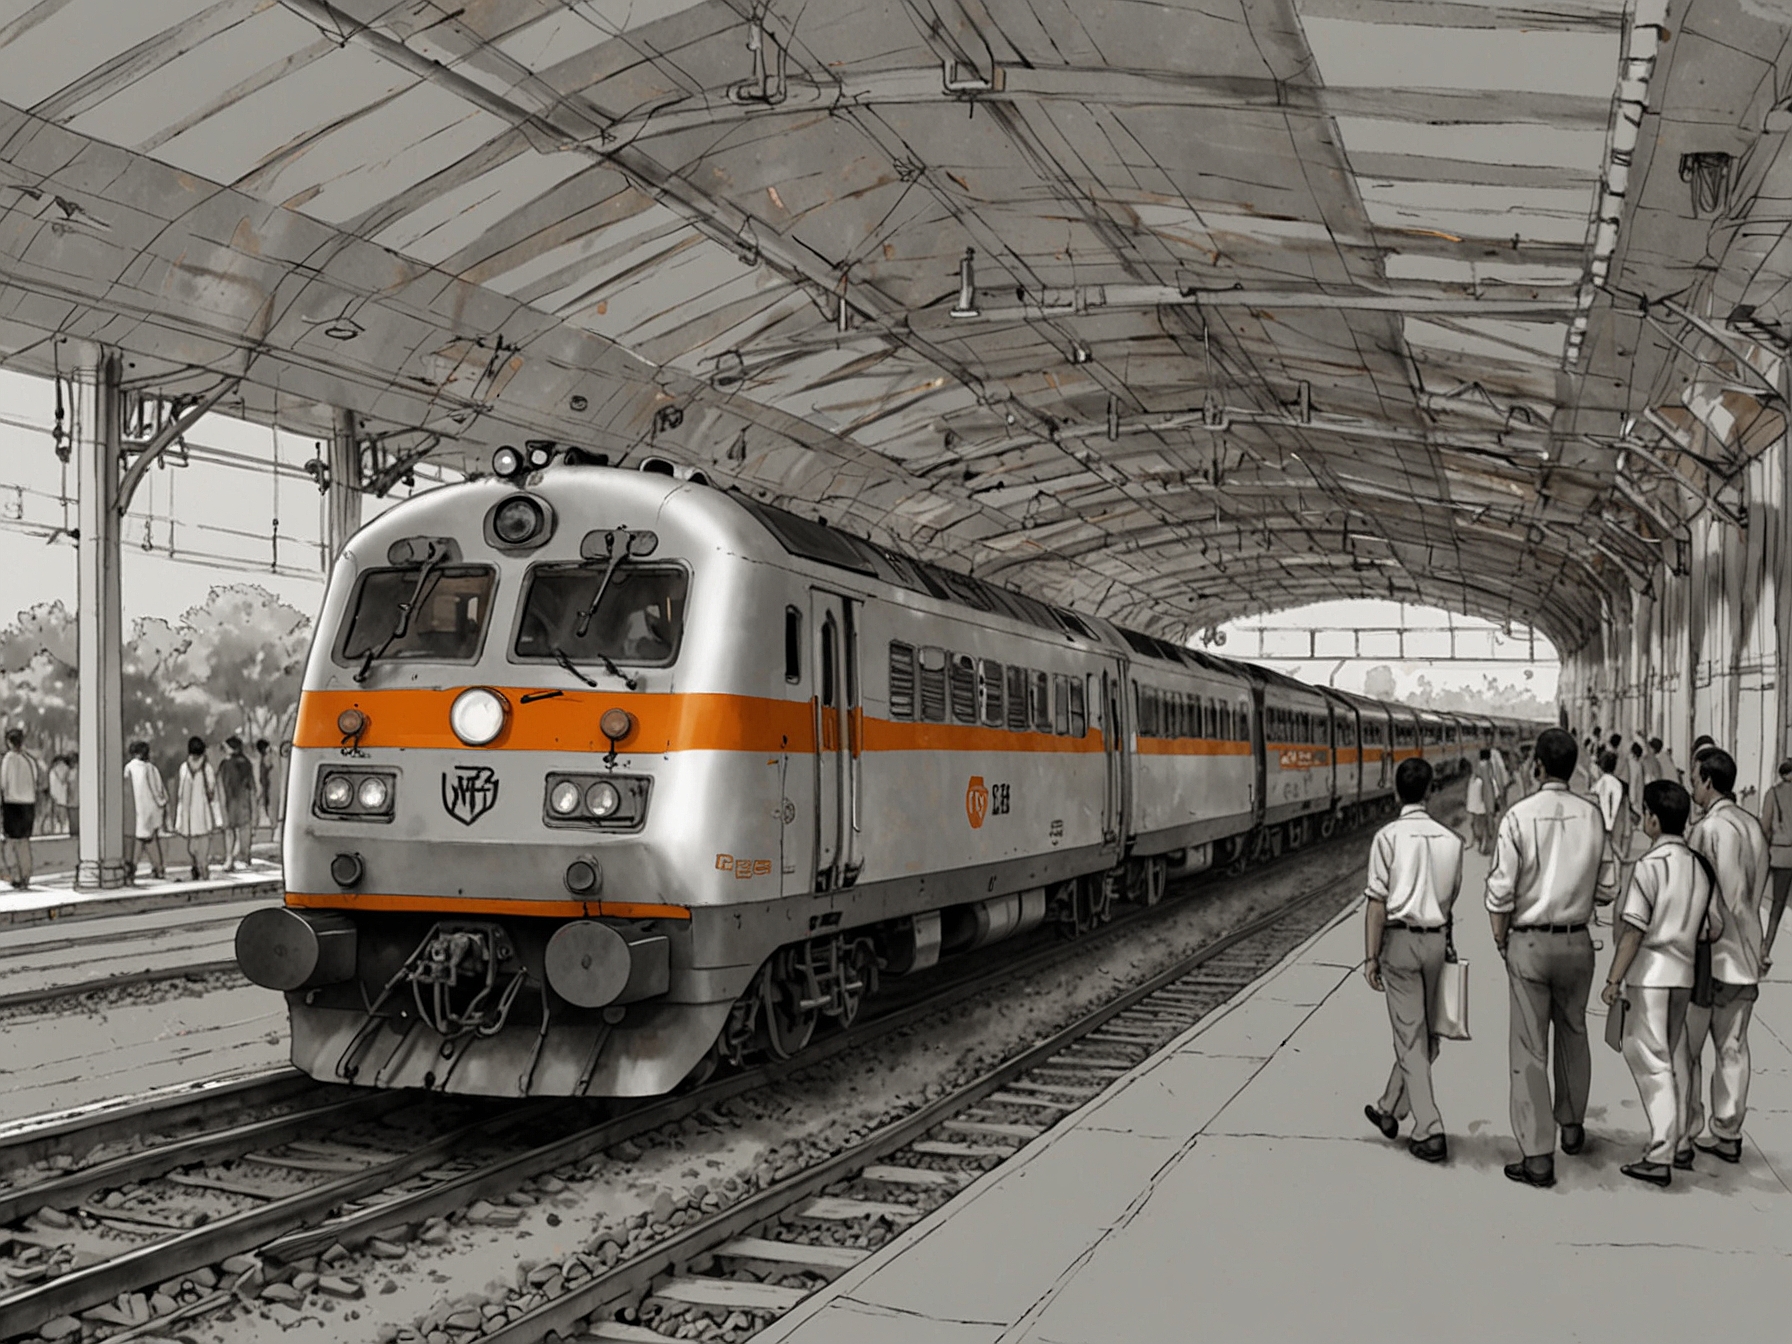 An illustration showing the Vandebharat train, symbolizing technological advancements and infrastructure development in BJP-ruled states, as highlighted by Agnimitra Paul.